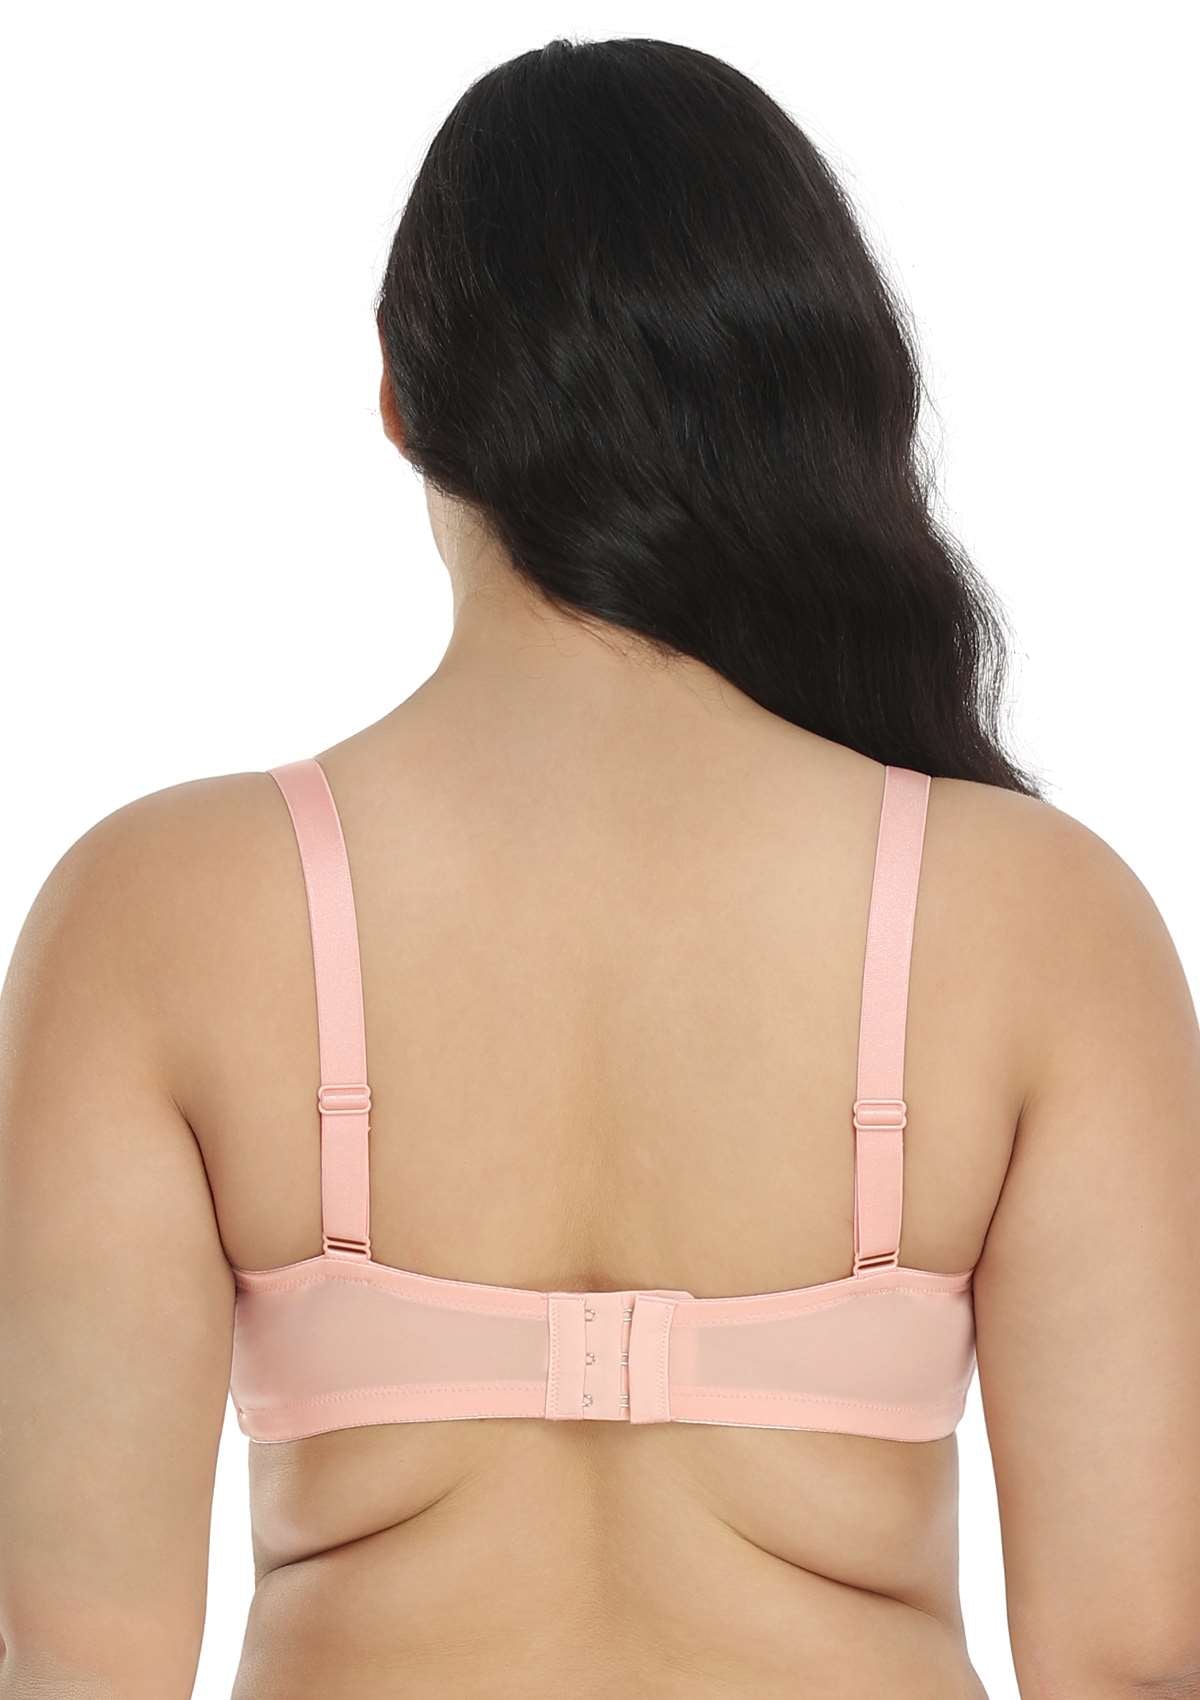 HSIA Rosa Bonica Sheer Lace Mesh Unlined Thin Comfy Woman Bra - Pink / 42 / C